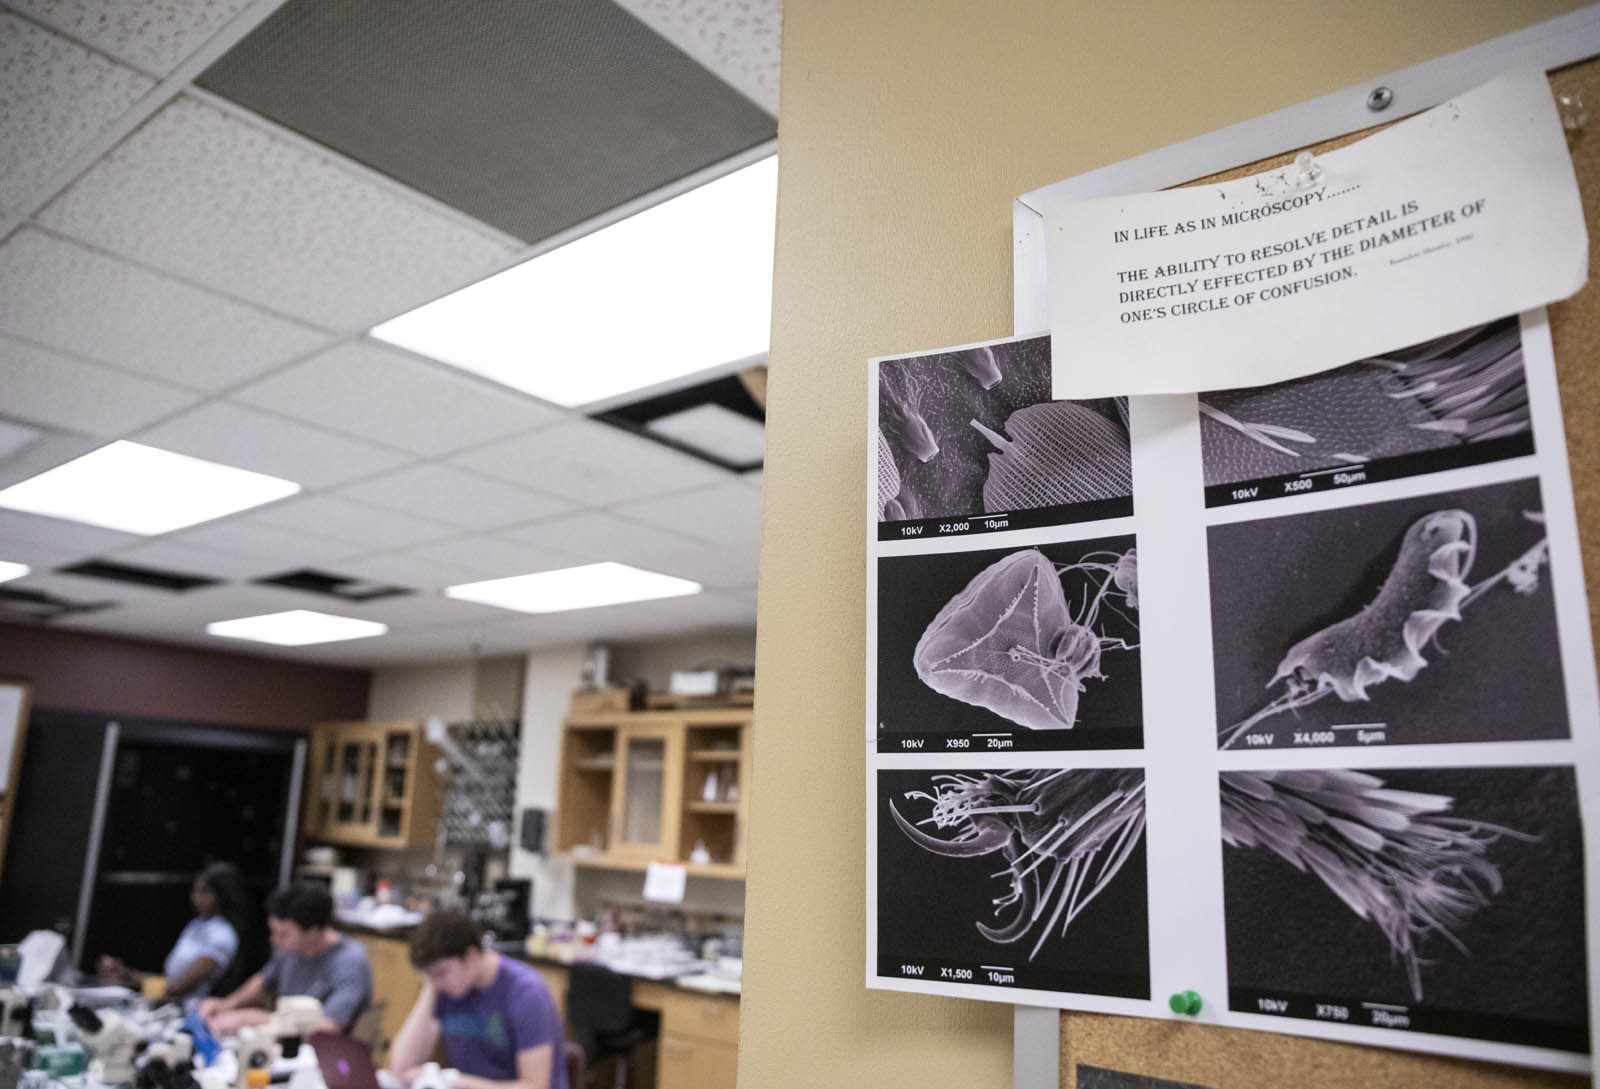 Ron Hathaway's Scanning Electron Microscopy class teaches students how to use a digital scanning microscope that they can use to take photos of microorganisms.